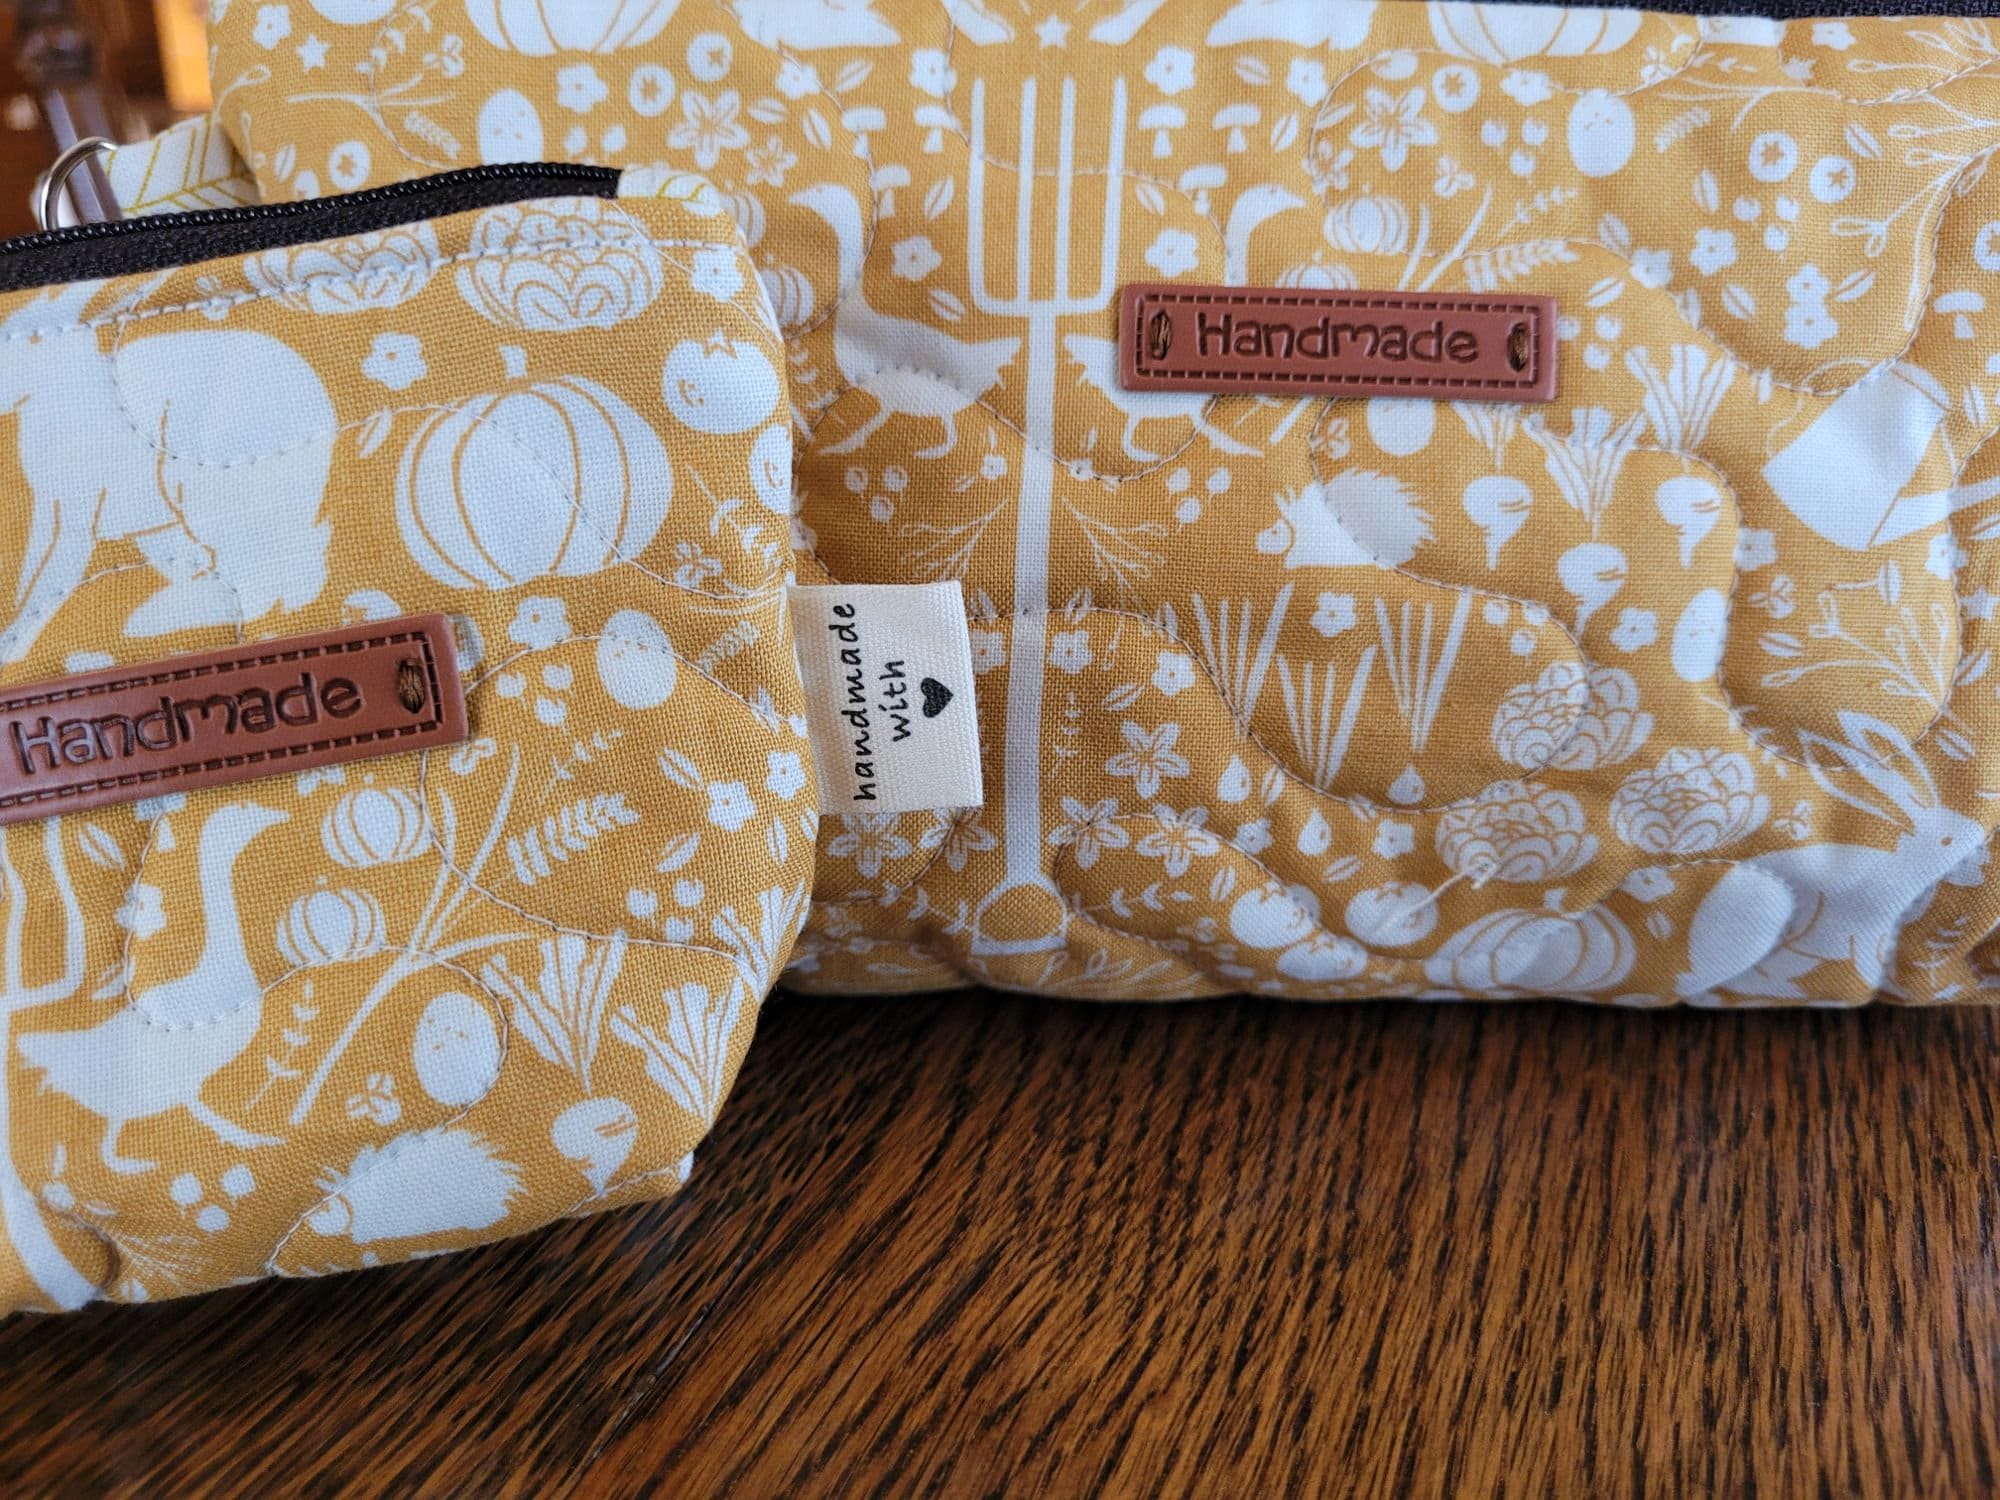 Small Zipper Pouch Set | Quilted Makeup Cosmetic Bag | Travel Toiletry Bag | Yellow Farm Theme Fabric Pencil Case